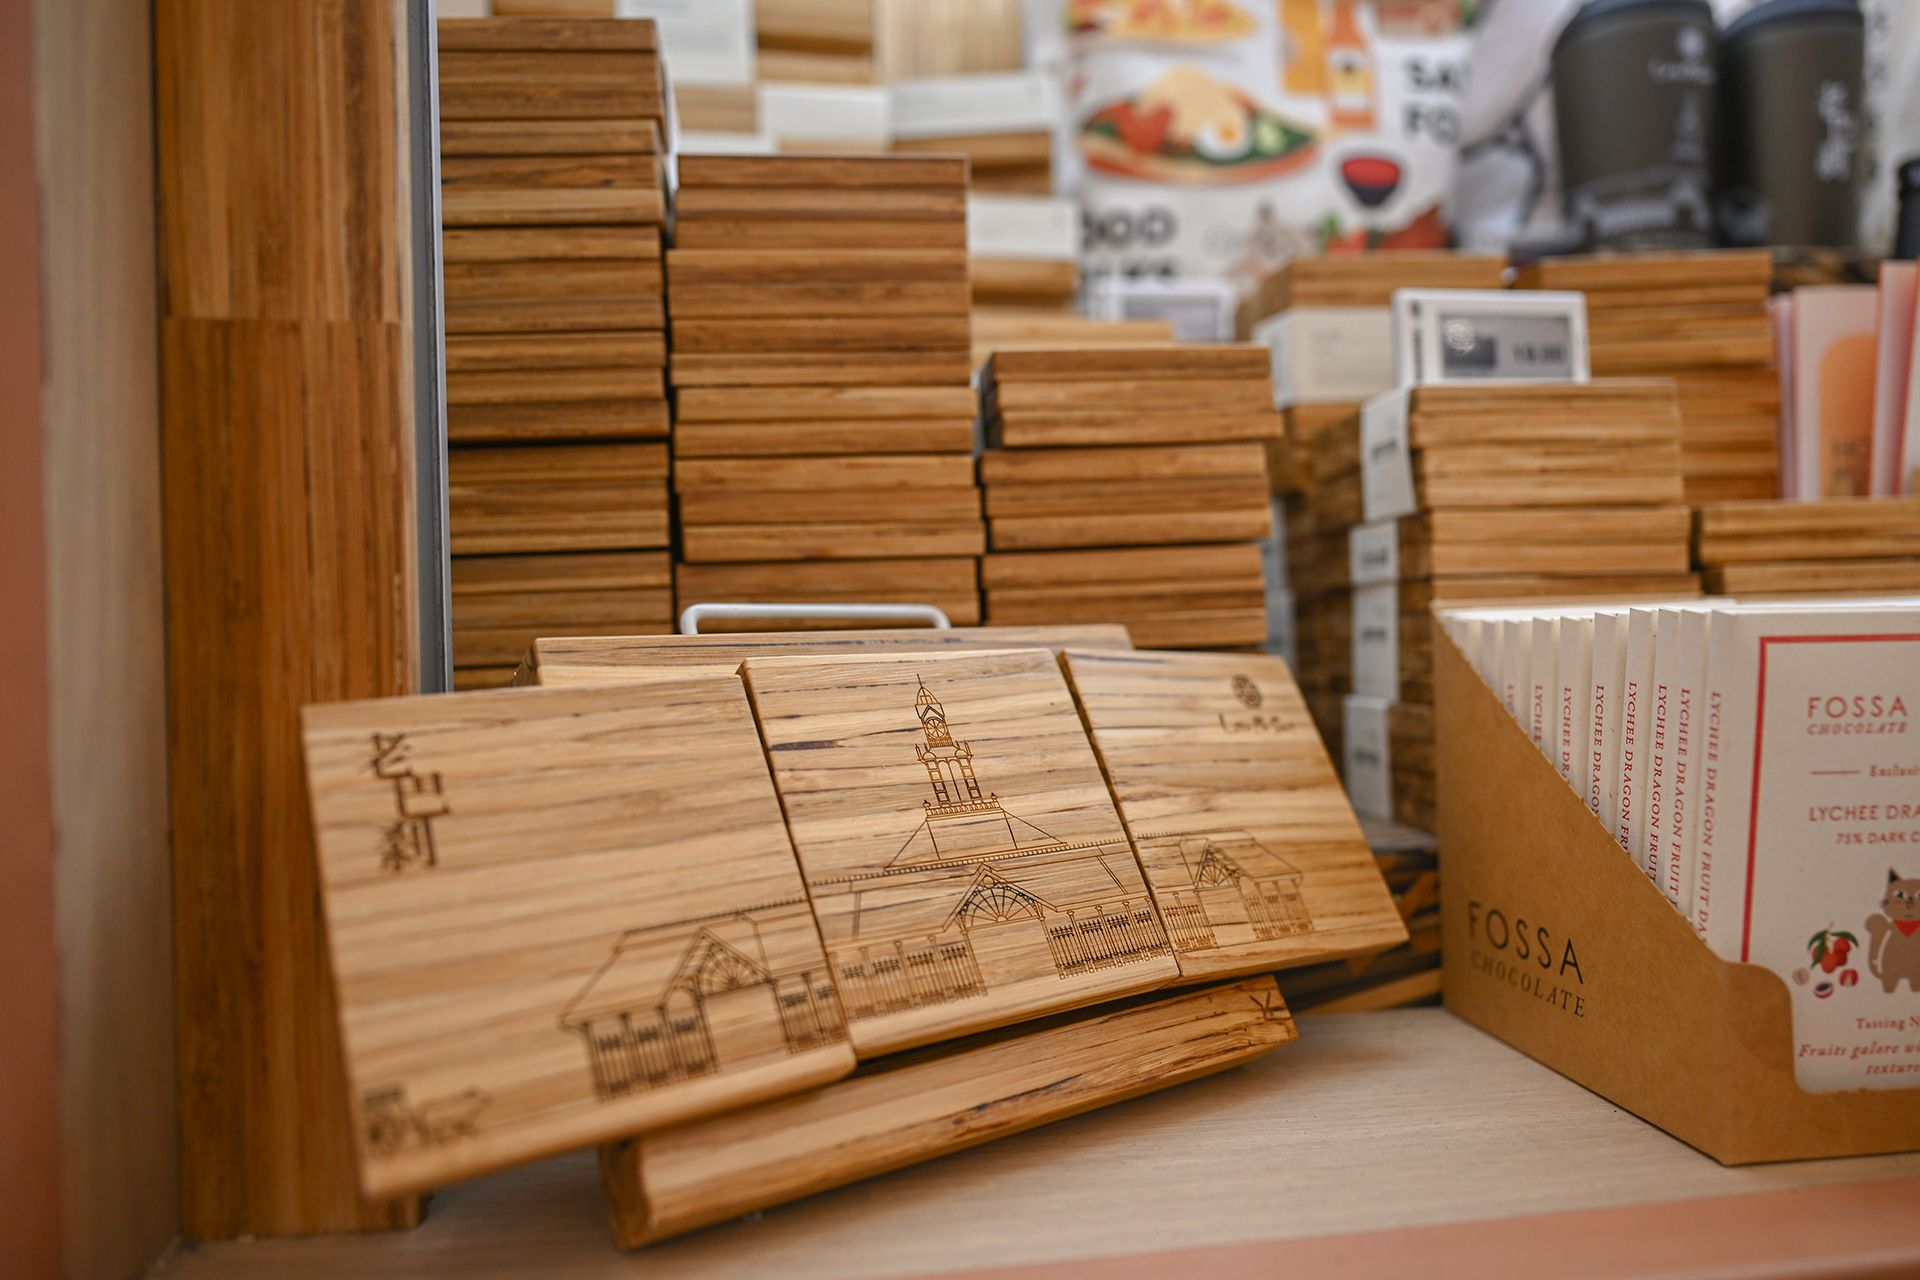 Small coasters made from wooden tiles by ChopValue being sold as souvenirs at Food Folks in Lau Pa Sat.